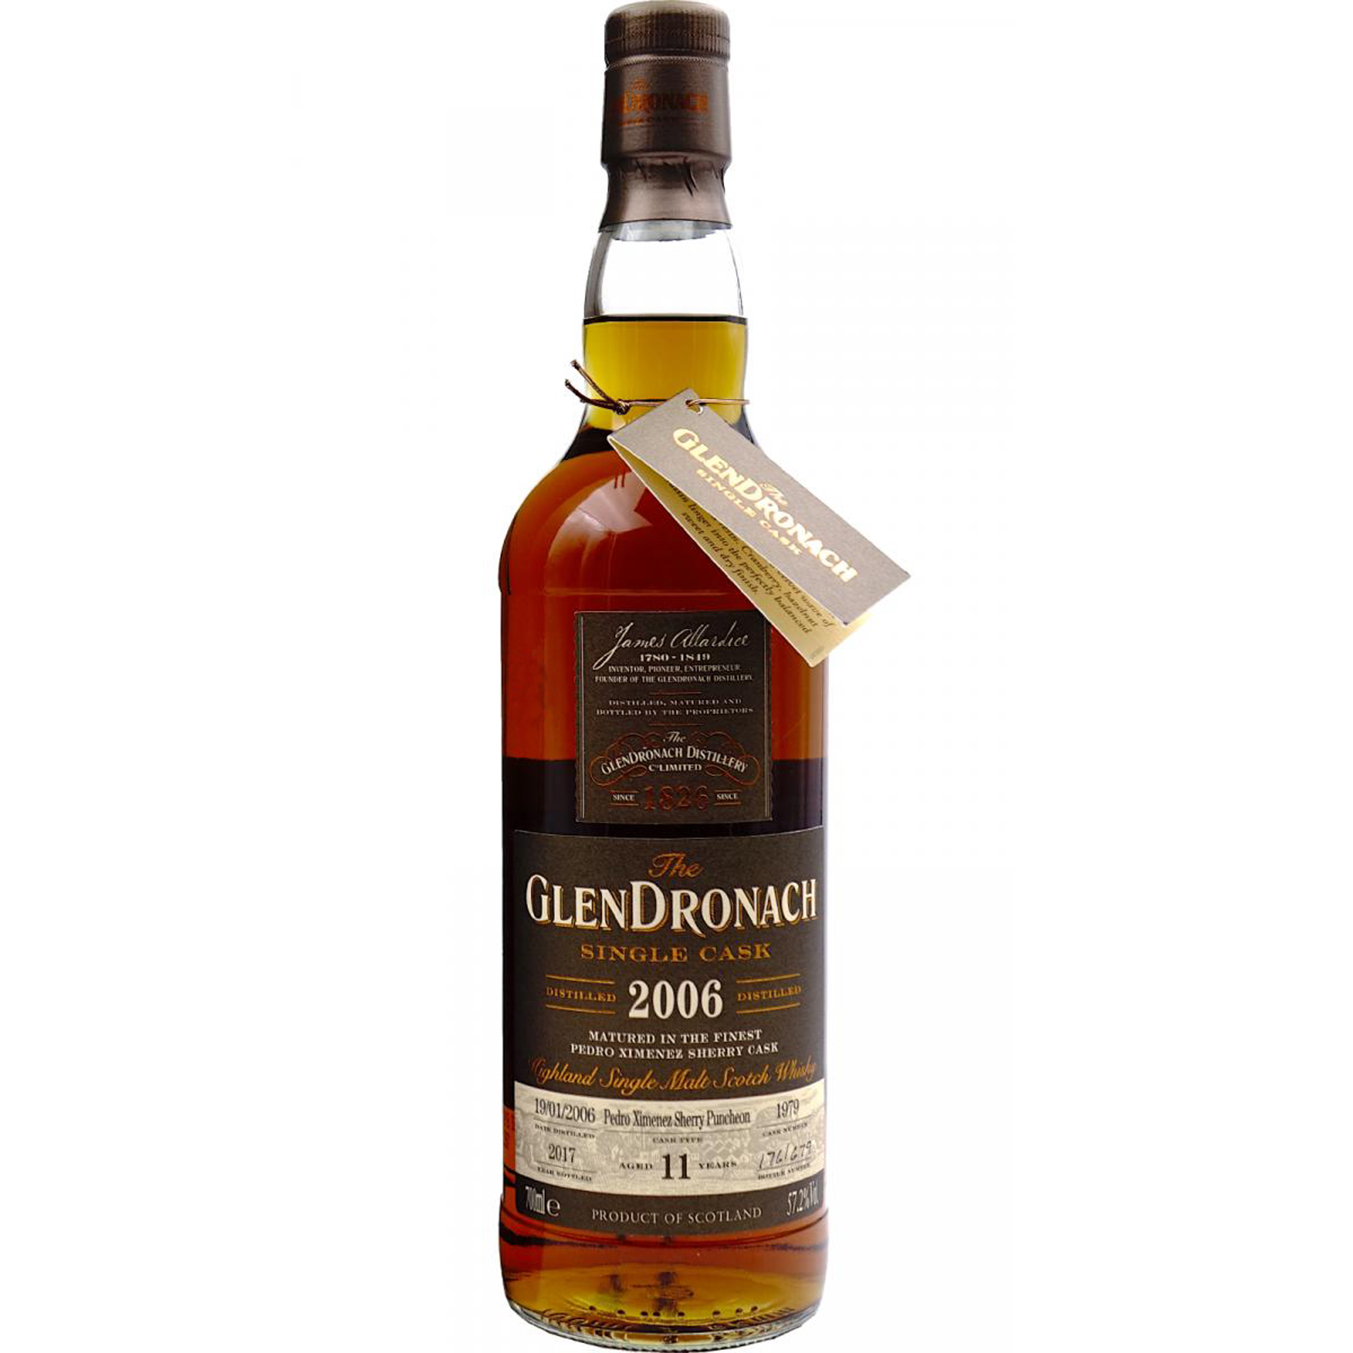 You are currently viewing Glendronach 2006 11 years – cask #1979